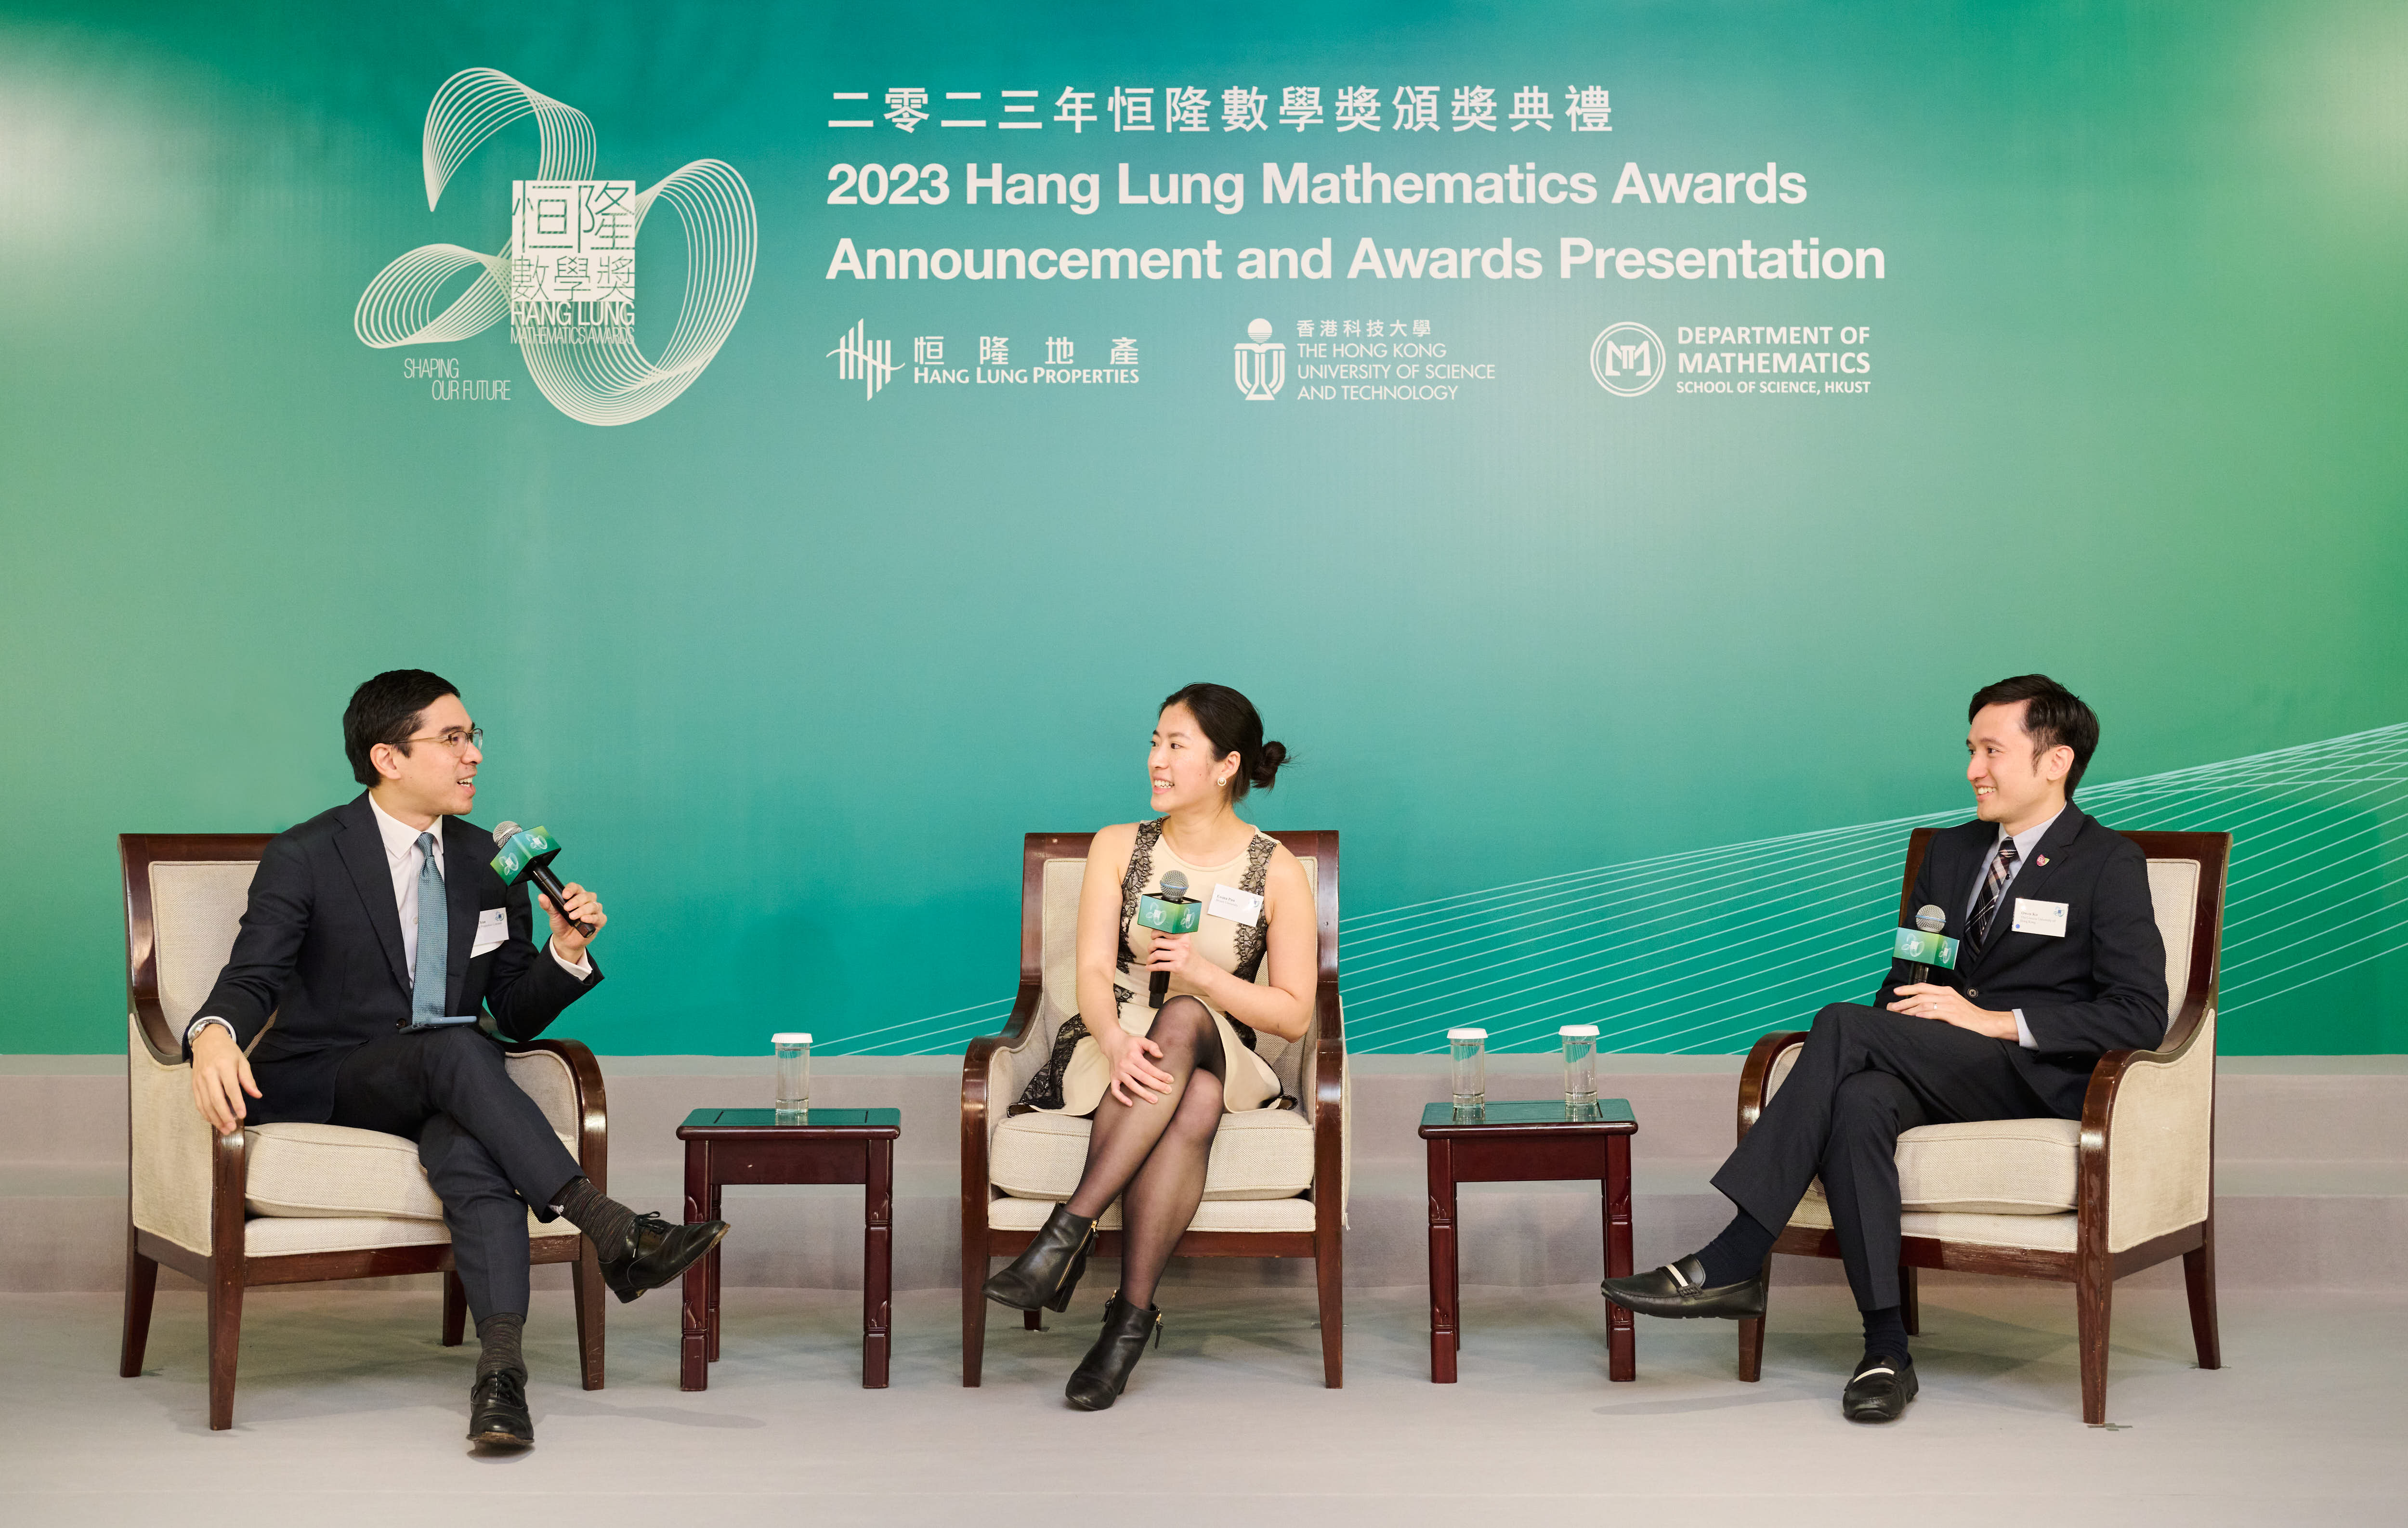 (From left) Mr. Adriel CHAN, Vice Chair of Hang Lung Properties, hosts a Fireside Chat featuring Ms. Ewina PUN, 2012 HLMA winner and doctoral candidate at Brown University, and Dr. Owen H. KO, 2004 HLMA winner and Assistant Dean (Research), Faculty of Medicine at The Chinese University of Hong Kong, on the theme “Unleashing Possibilities in Neuroscience and Neural Engineering with Mathematics”